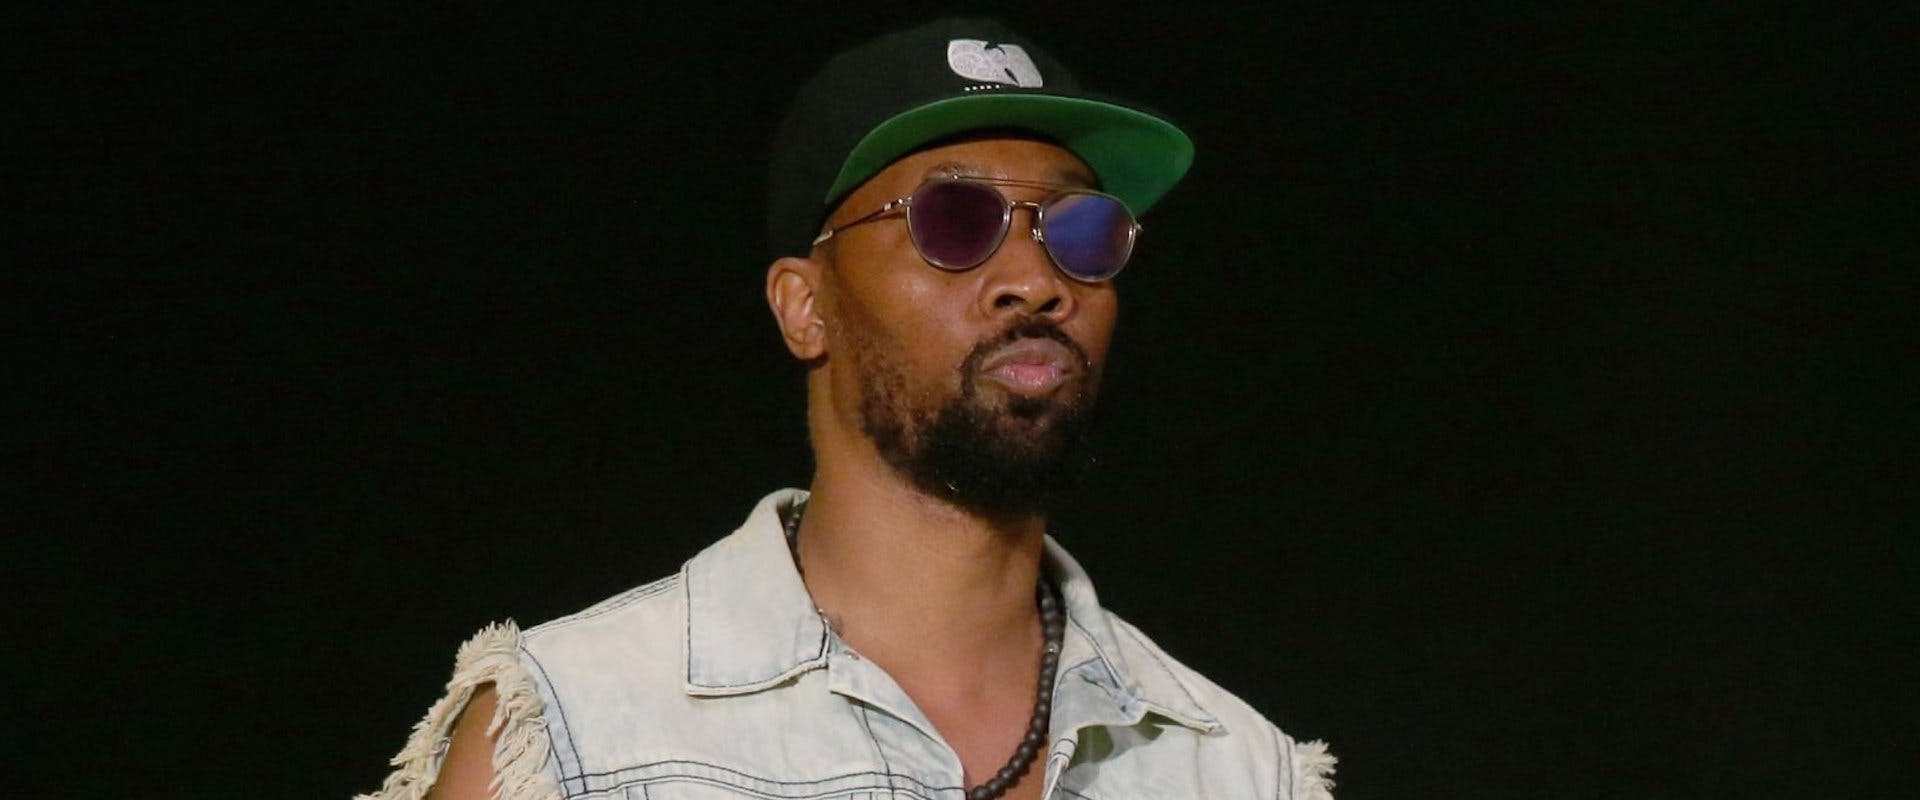 RZA of Wu-Tang Clan performs during the 2019 KAABOO Del Mar at Del Mar Race Track on September 13, 2019 in Del Mar, California. 